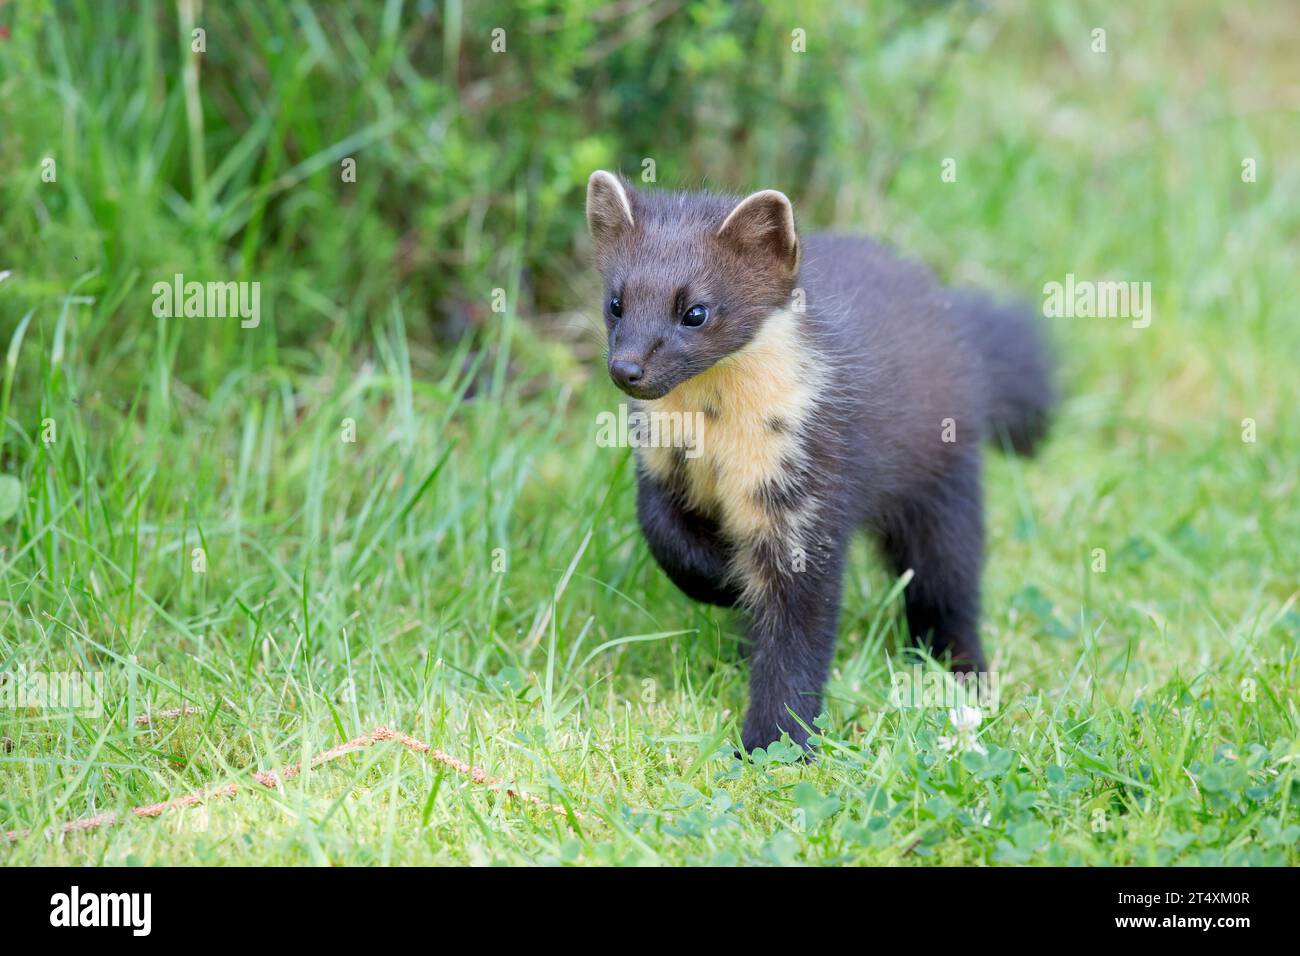 Pine marten on a stroll SCOTLAND TOUCHING images of two adorable British pine martens show one of them affectionately showering its mate with kisses. Stock Photo